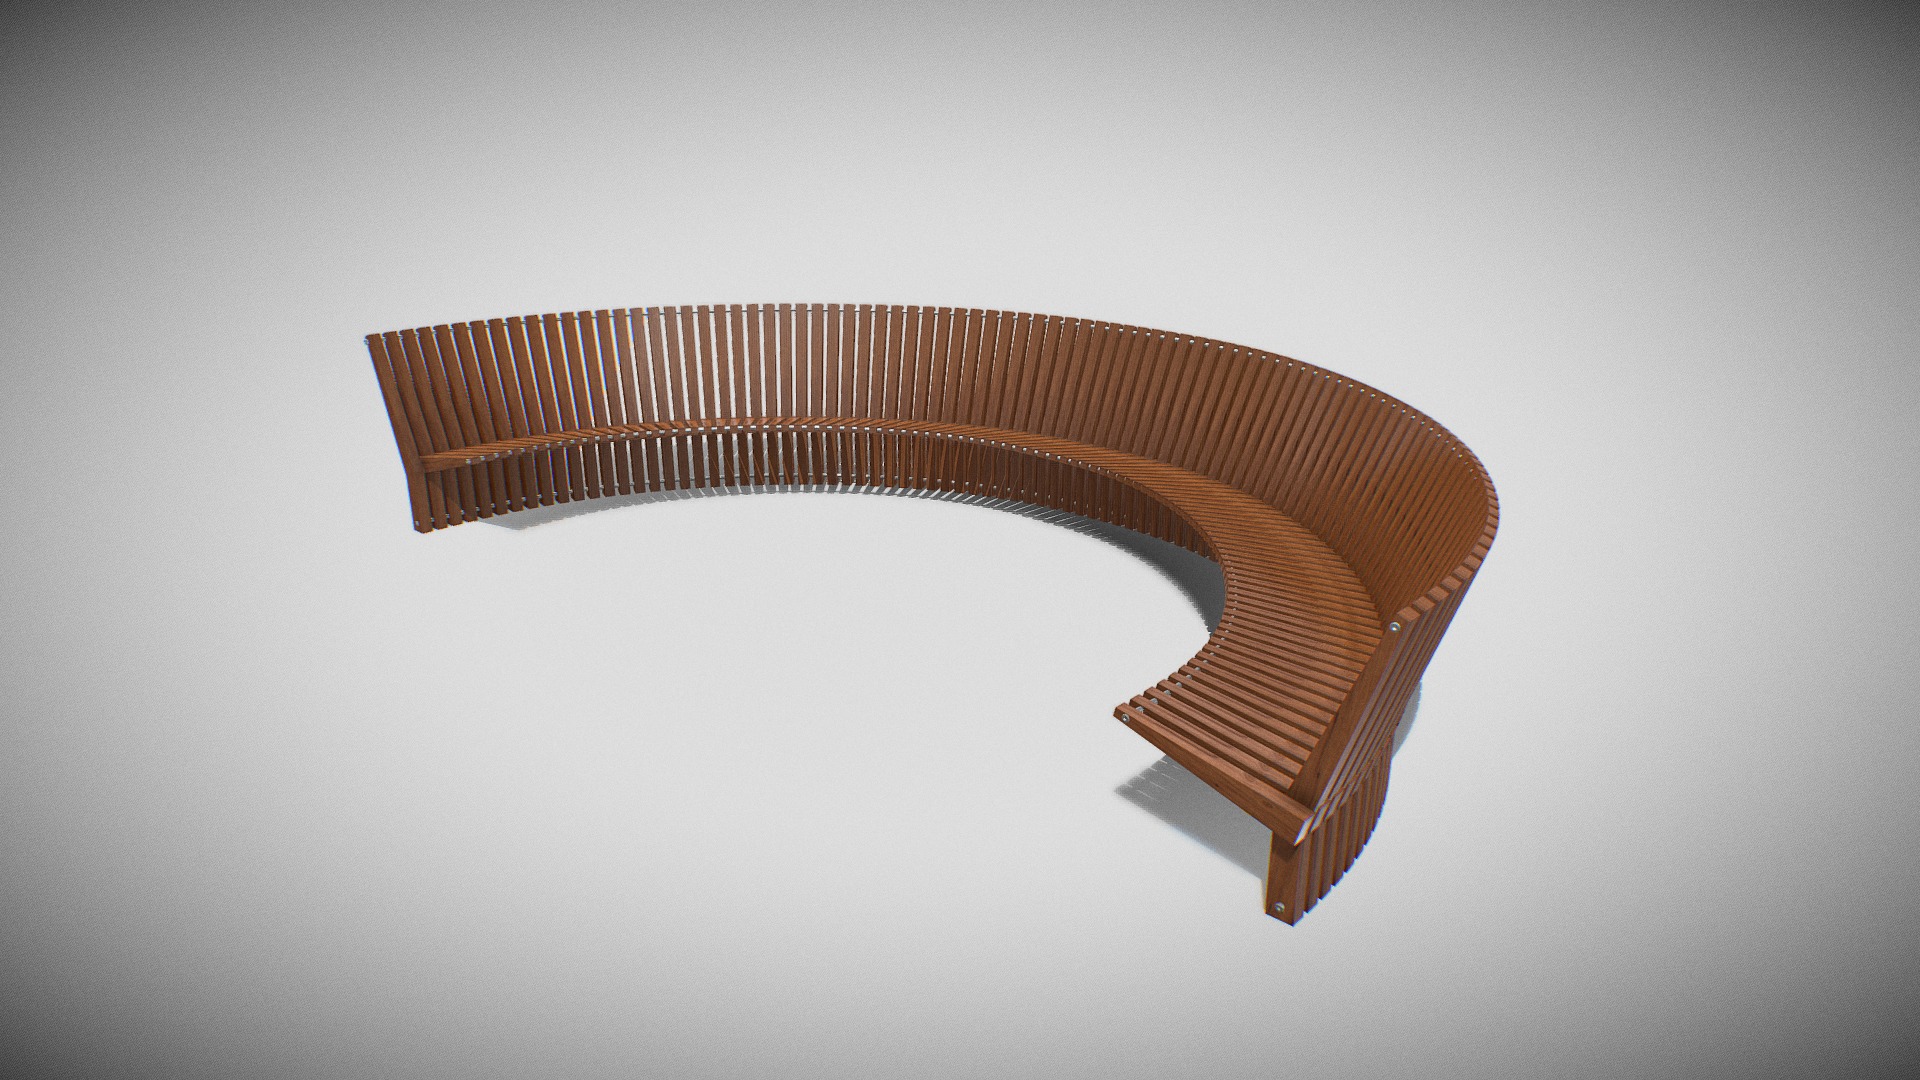 3D model Astral Bench-walnut wood - This is a 3D model of the Astral Bench-walnut wood. The 3D model is about a wooden object with a handle.